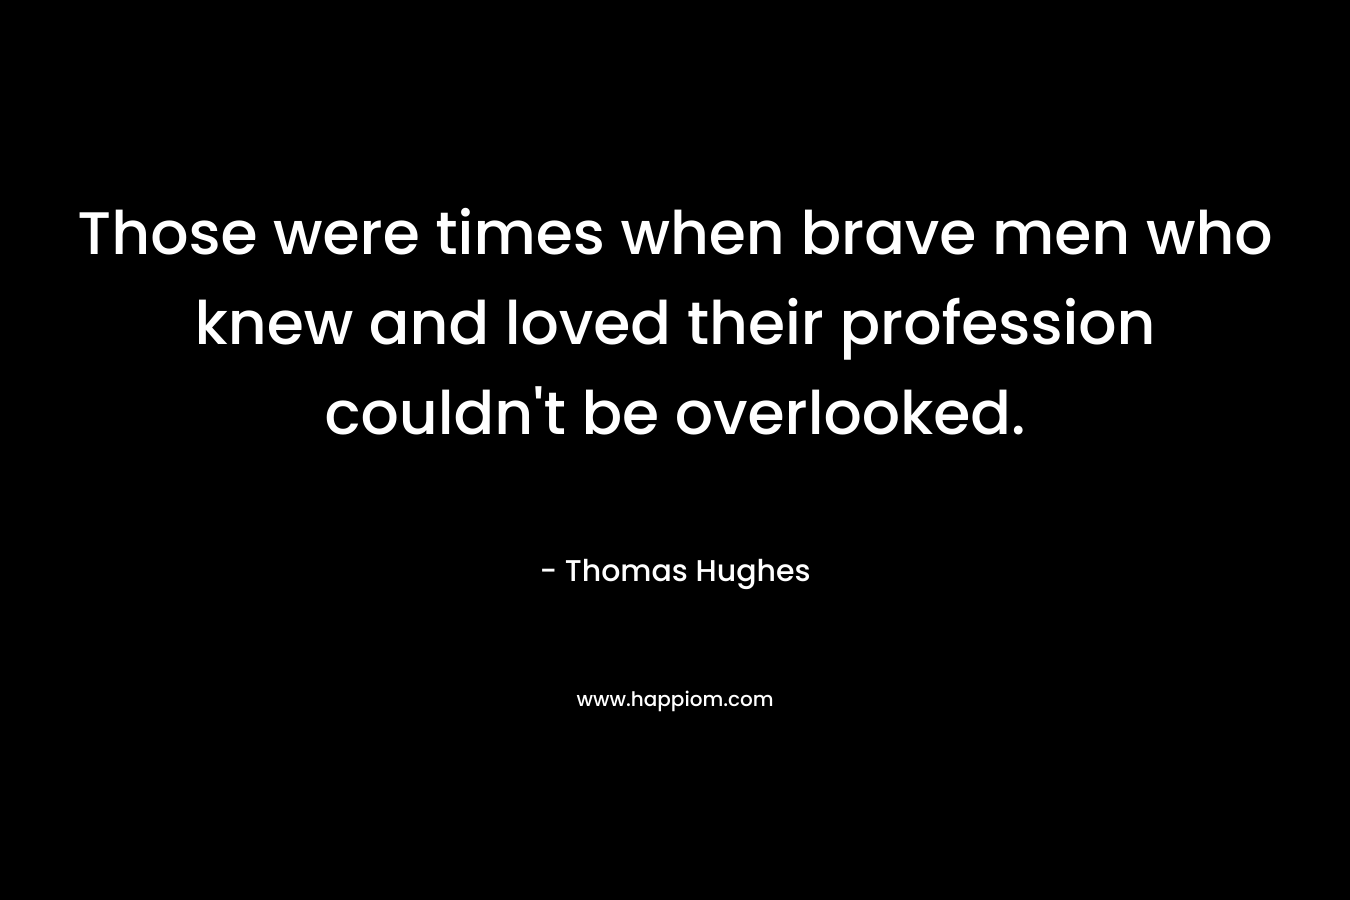 Those were times when brave men who knew and loved their profession couldn’t be overlooked. – Thomas Hughes